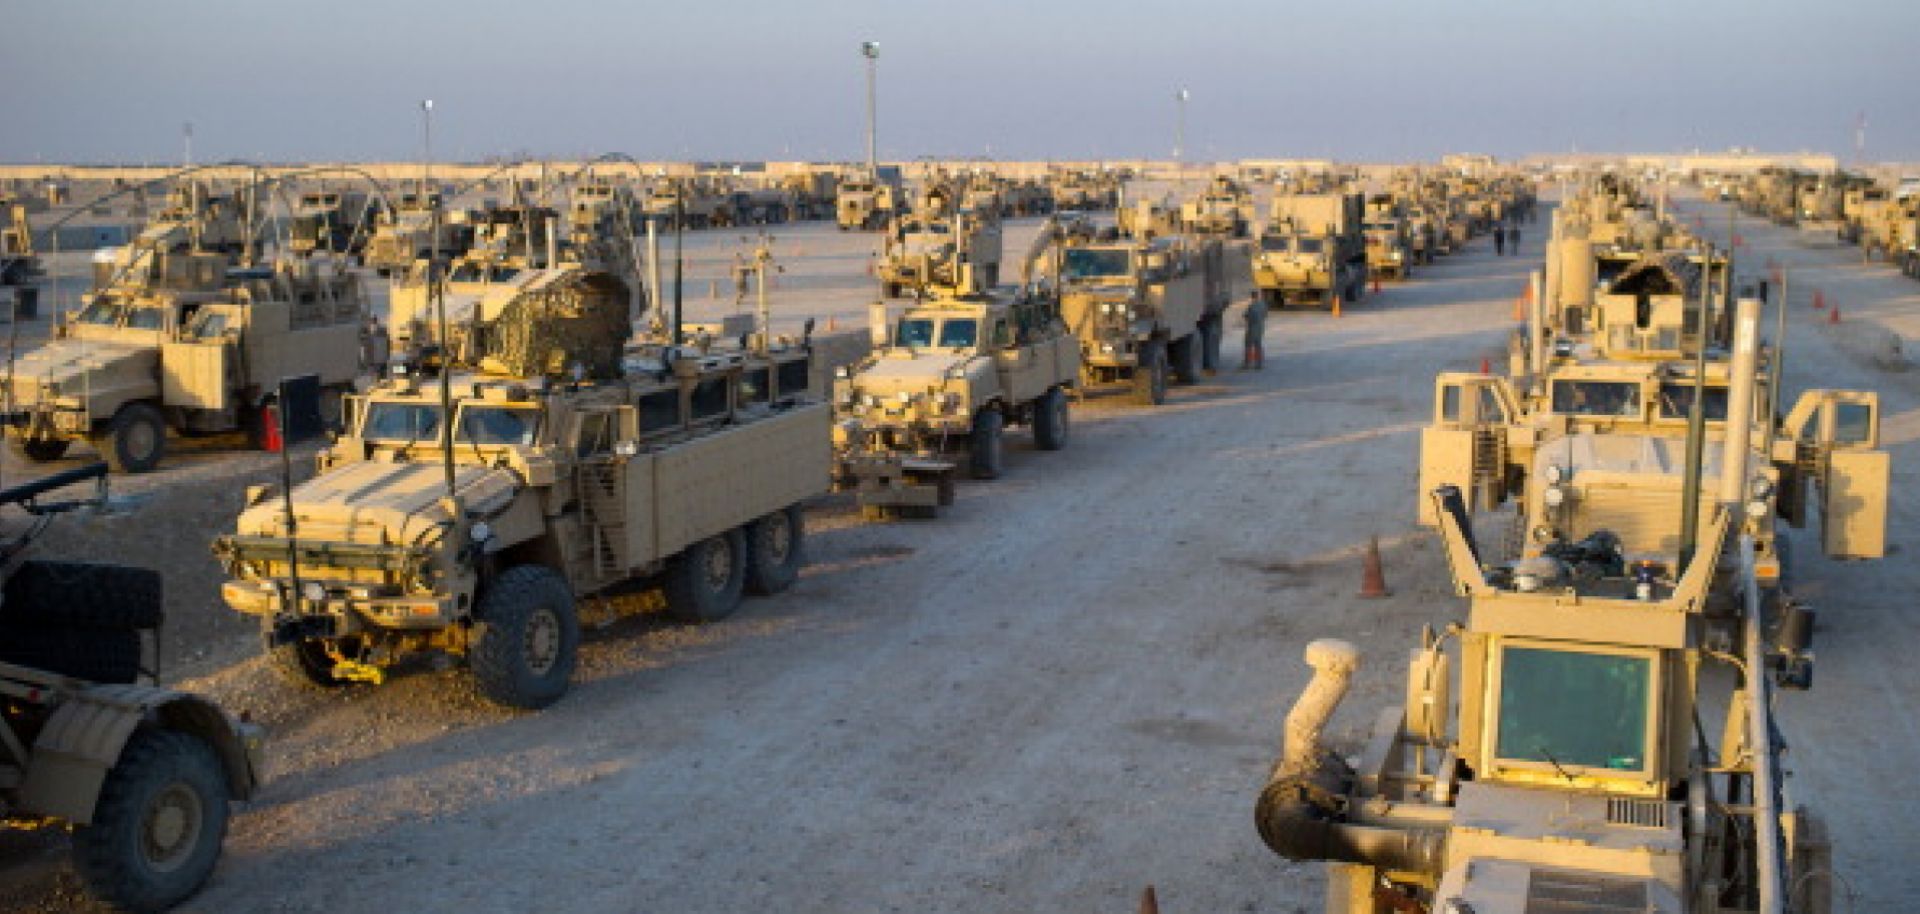 U.S. soldiers prepare the last convoy carrying troops at Camp Adder on the outskirts of the southern city of Nasiriyah on December 17, 2011, marking the withdrawal of U.S. troops from Iraq. 